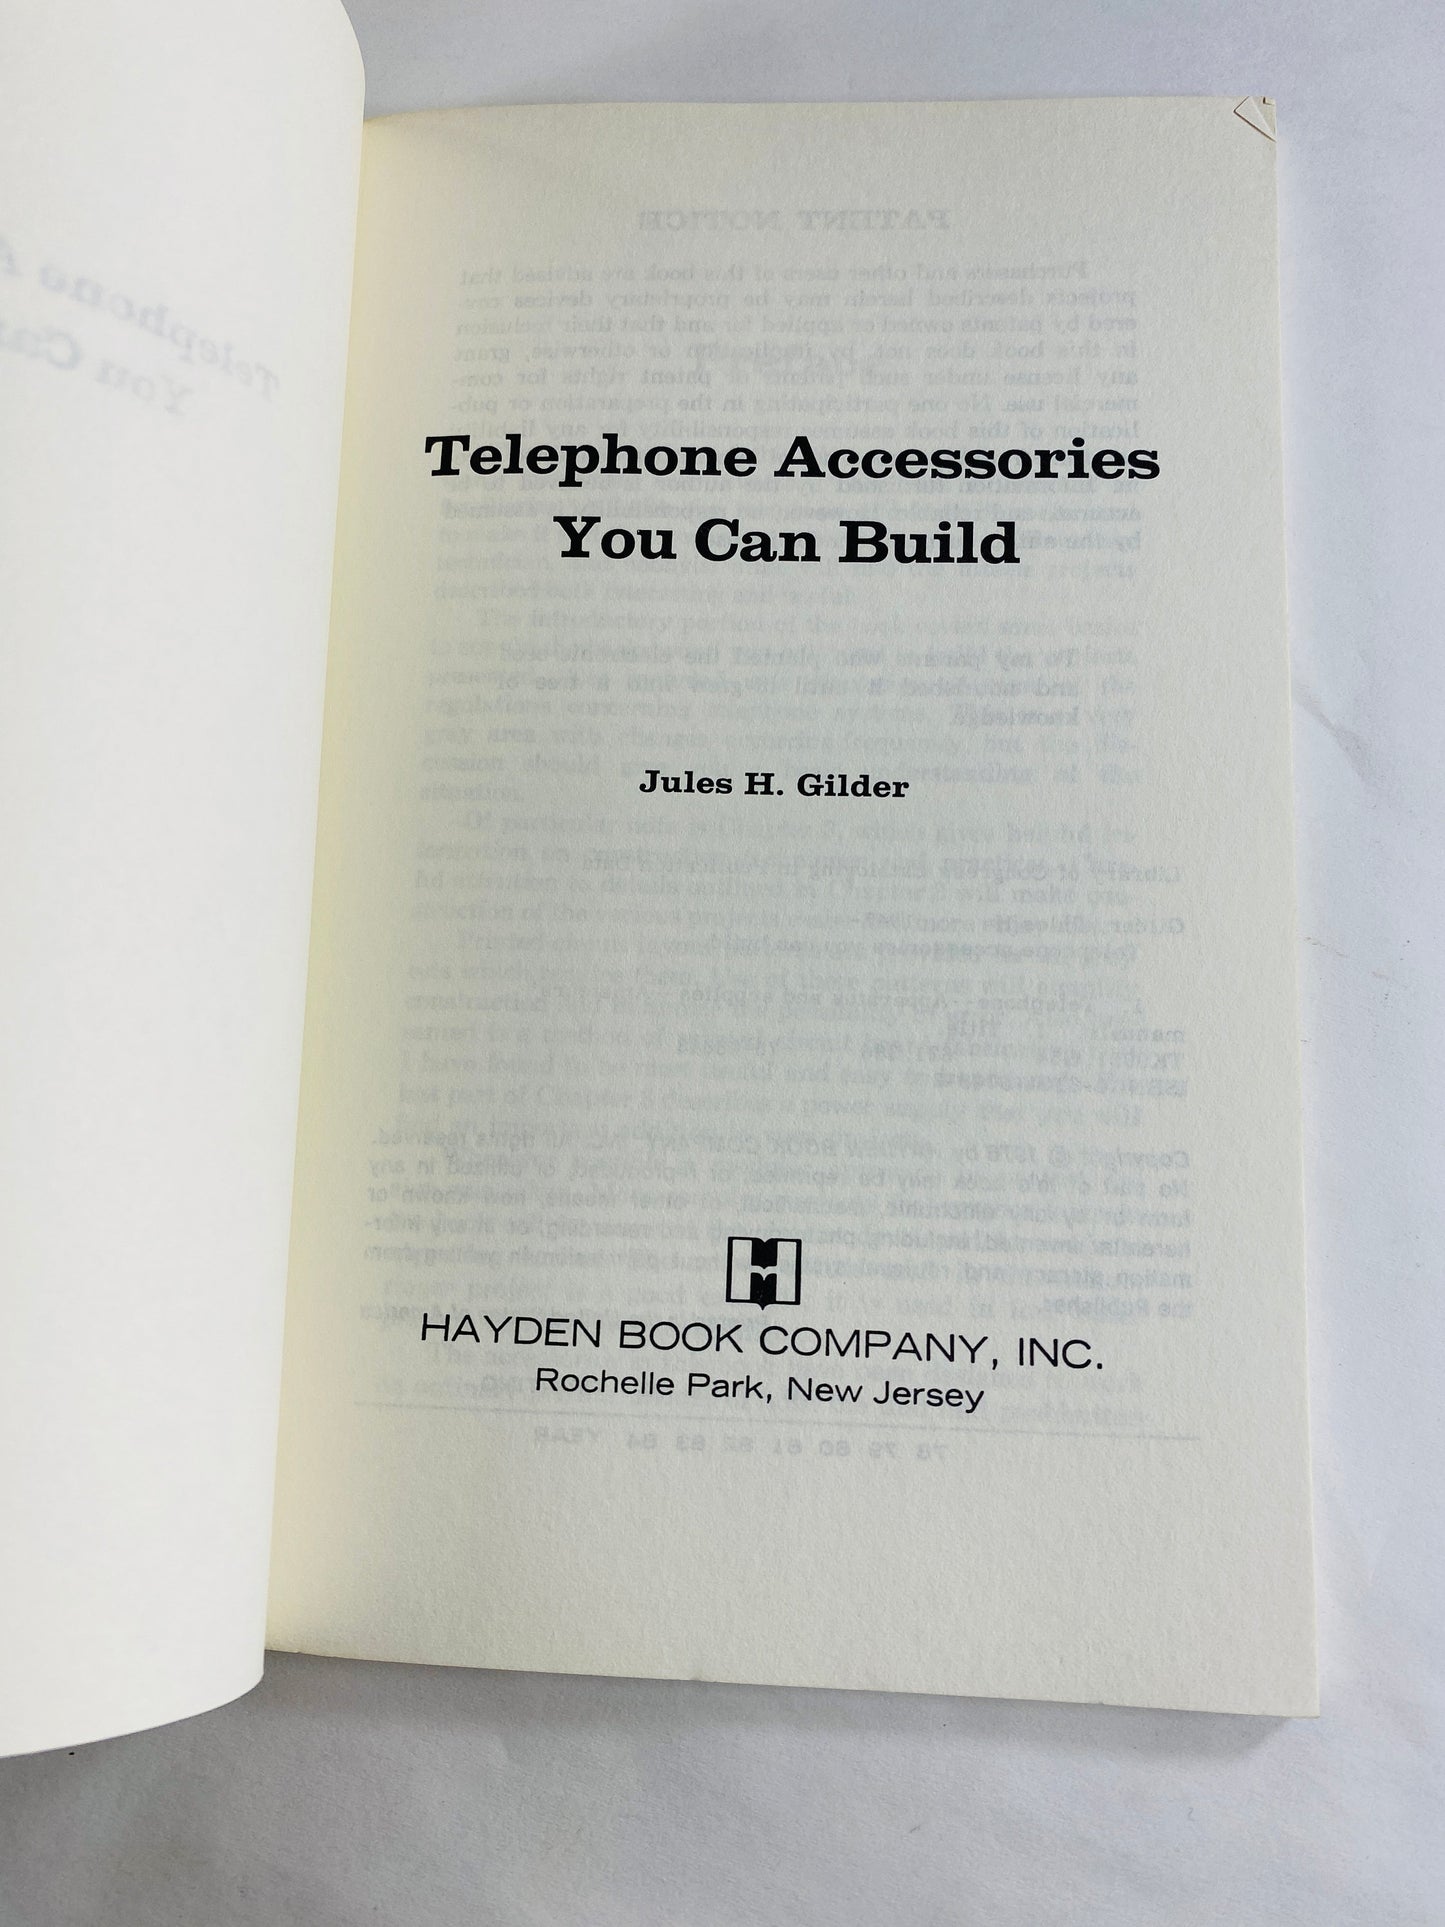 Telephone Accessories You Can Build vintage paperback book circa 1976 by Jules Glider Communications Broadcasting Telegraph Home decor